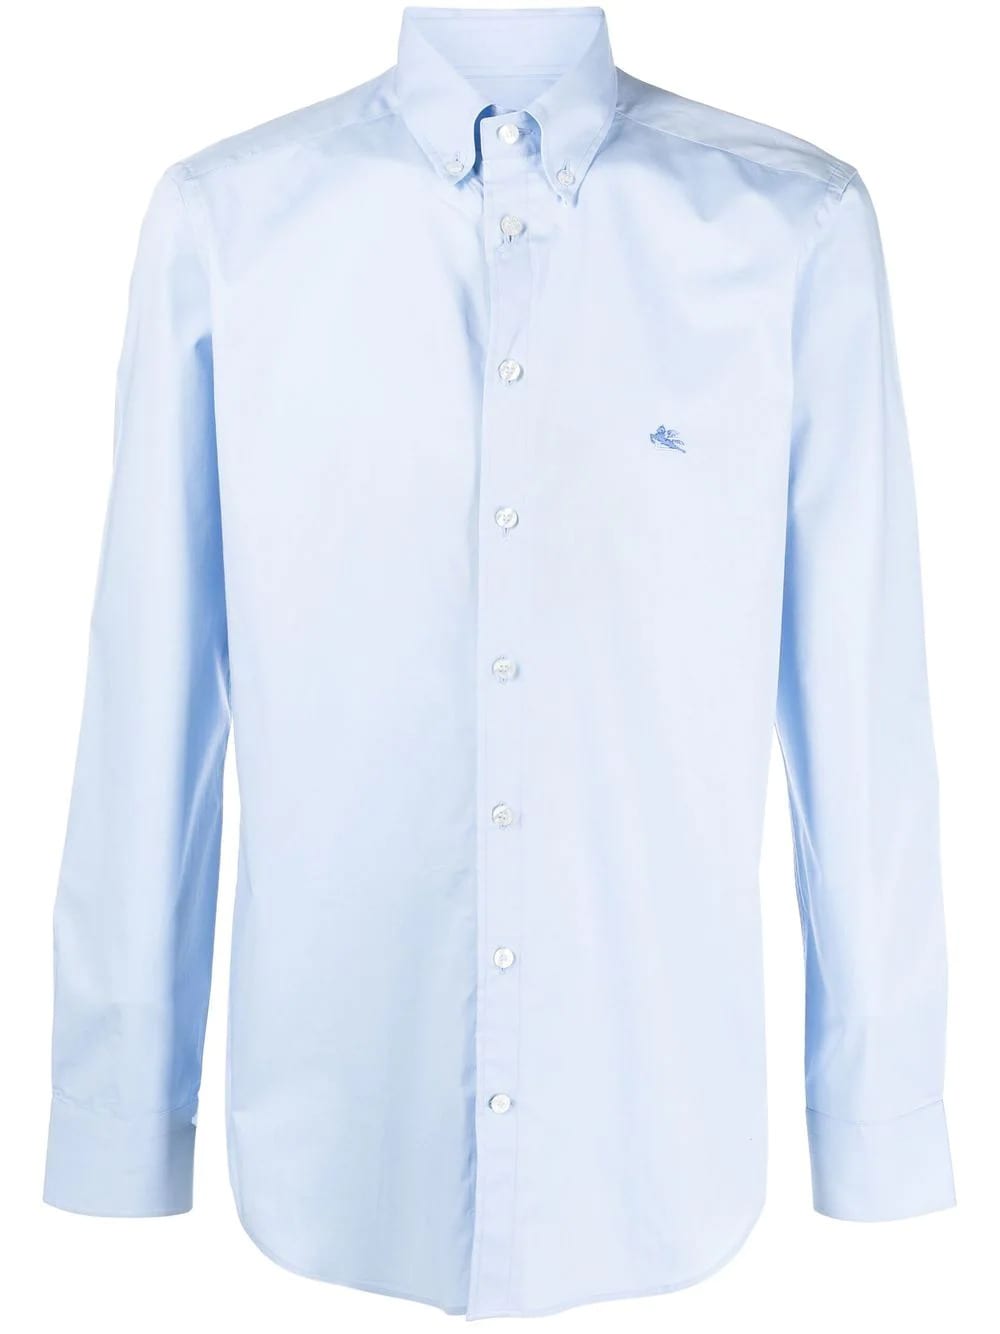 Etro Man Shirt In Light Blue Poplin With Embroidered Pegasus